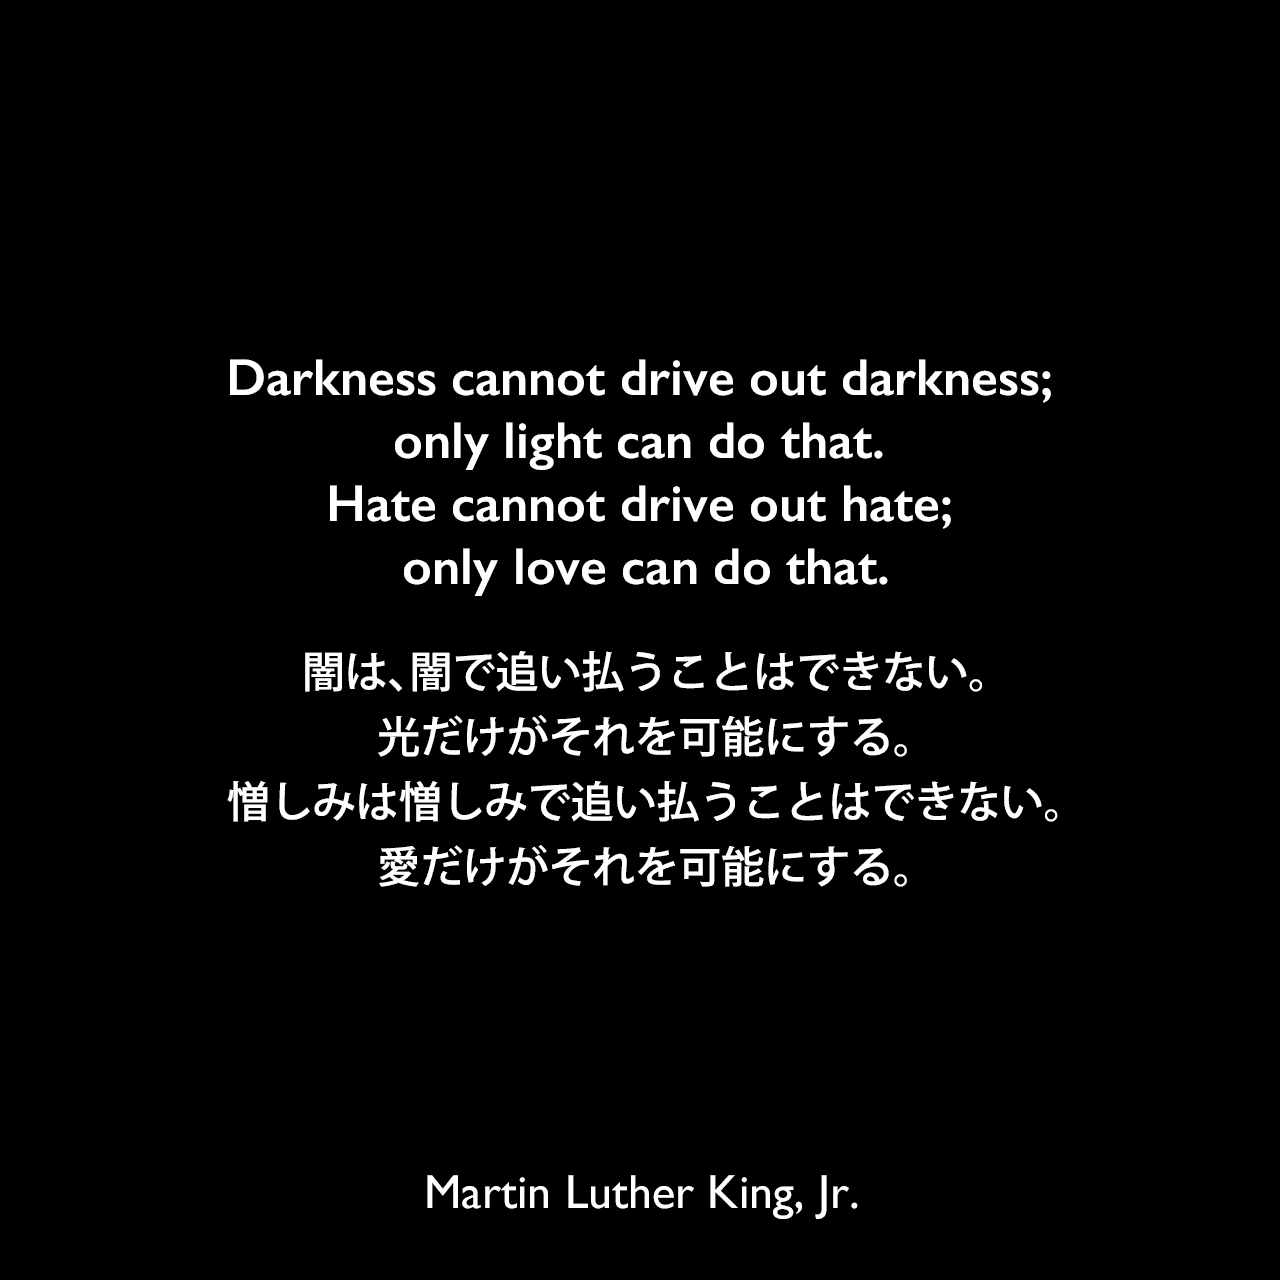 Darkness cannot drive out darkness; only light can do that. Hate cannot drive out hate; only love can do that.闇は、闇で追い払うことはできない。光だけがそれを可能にする。憎しみは憎しみで追い払うことはできない。愛だけがそれを可能にする。- 1957年の説教「Loving Your Enemies」よりMartin Luther King, Jr.